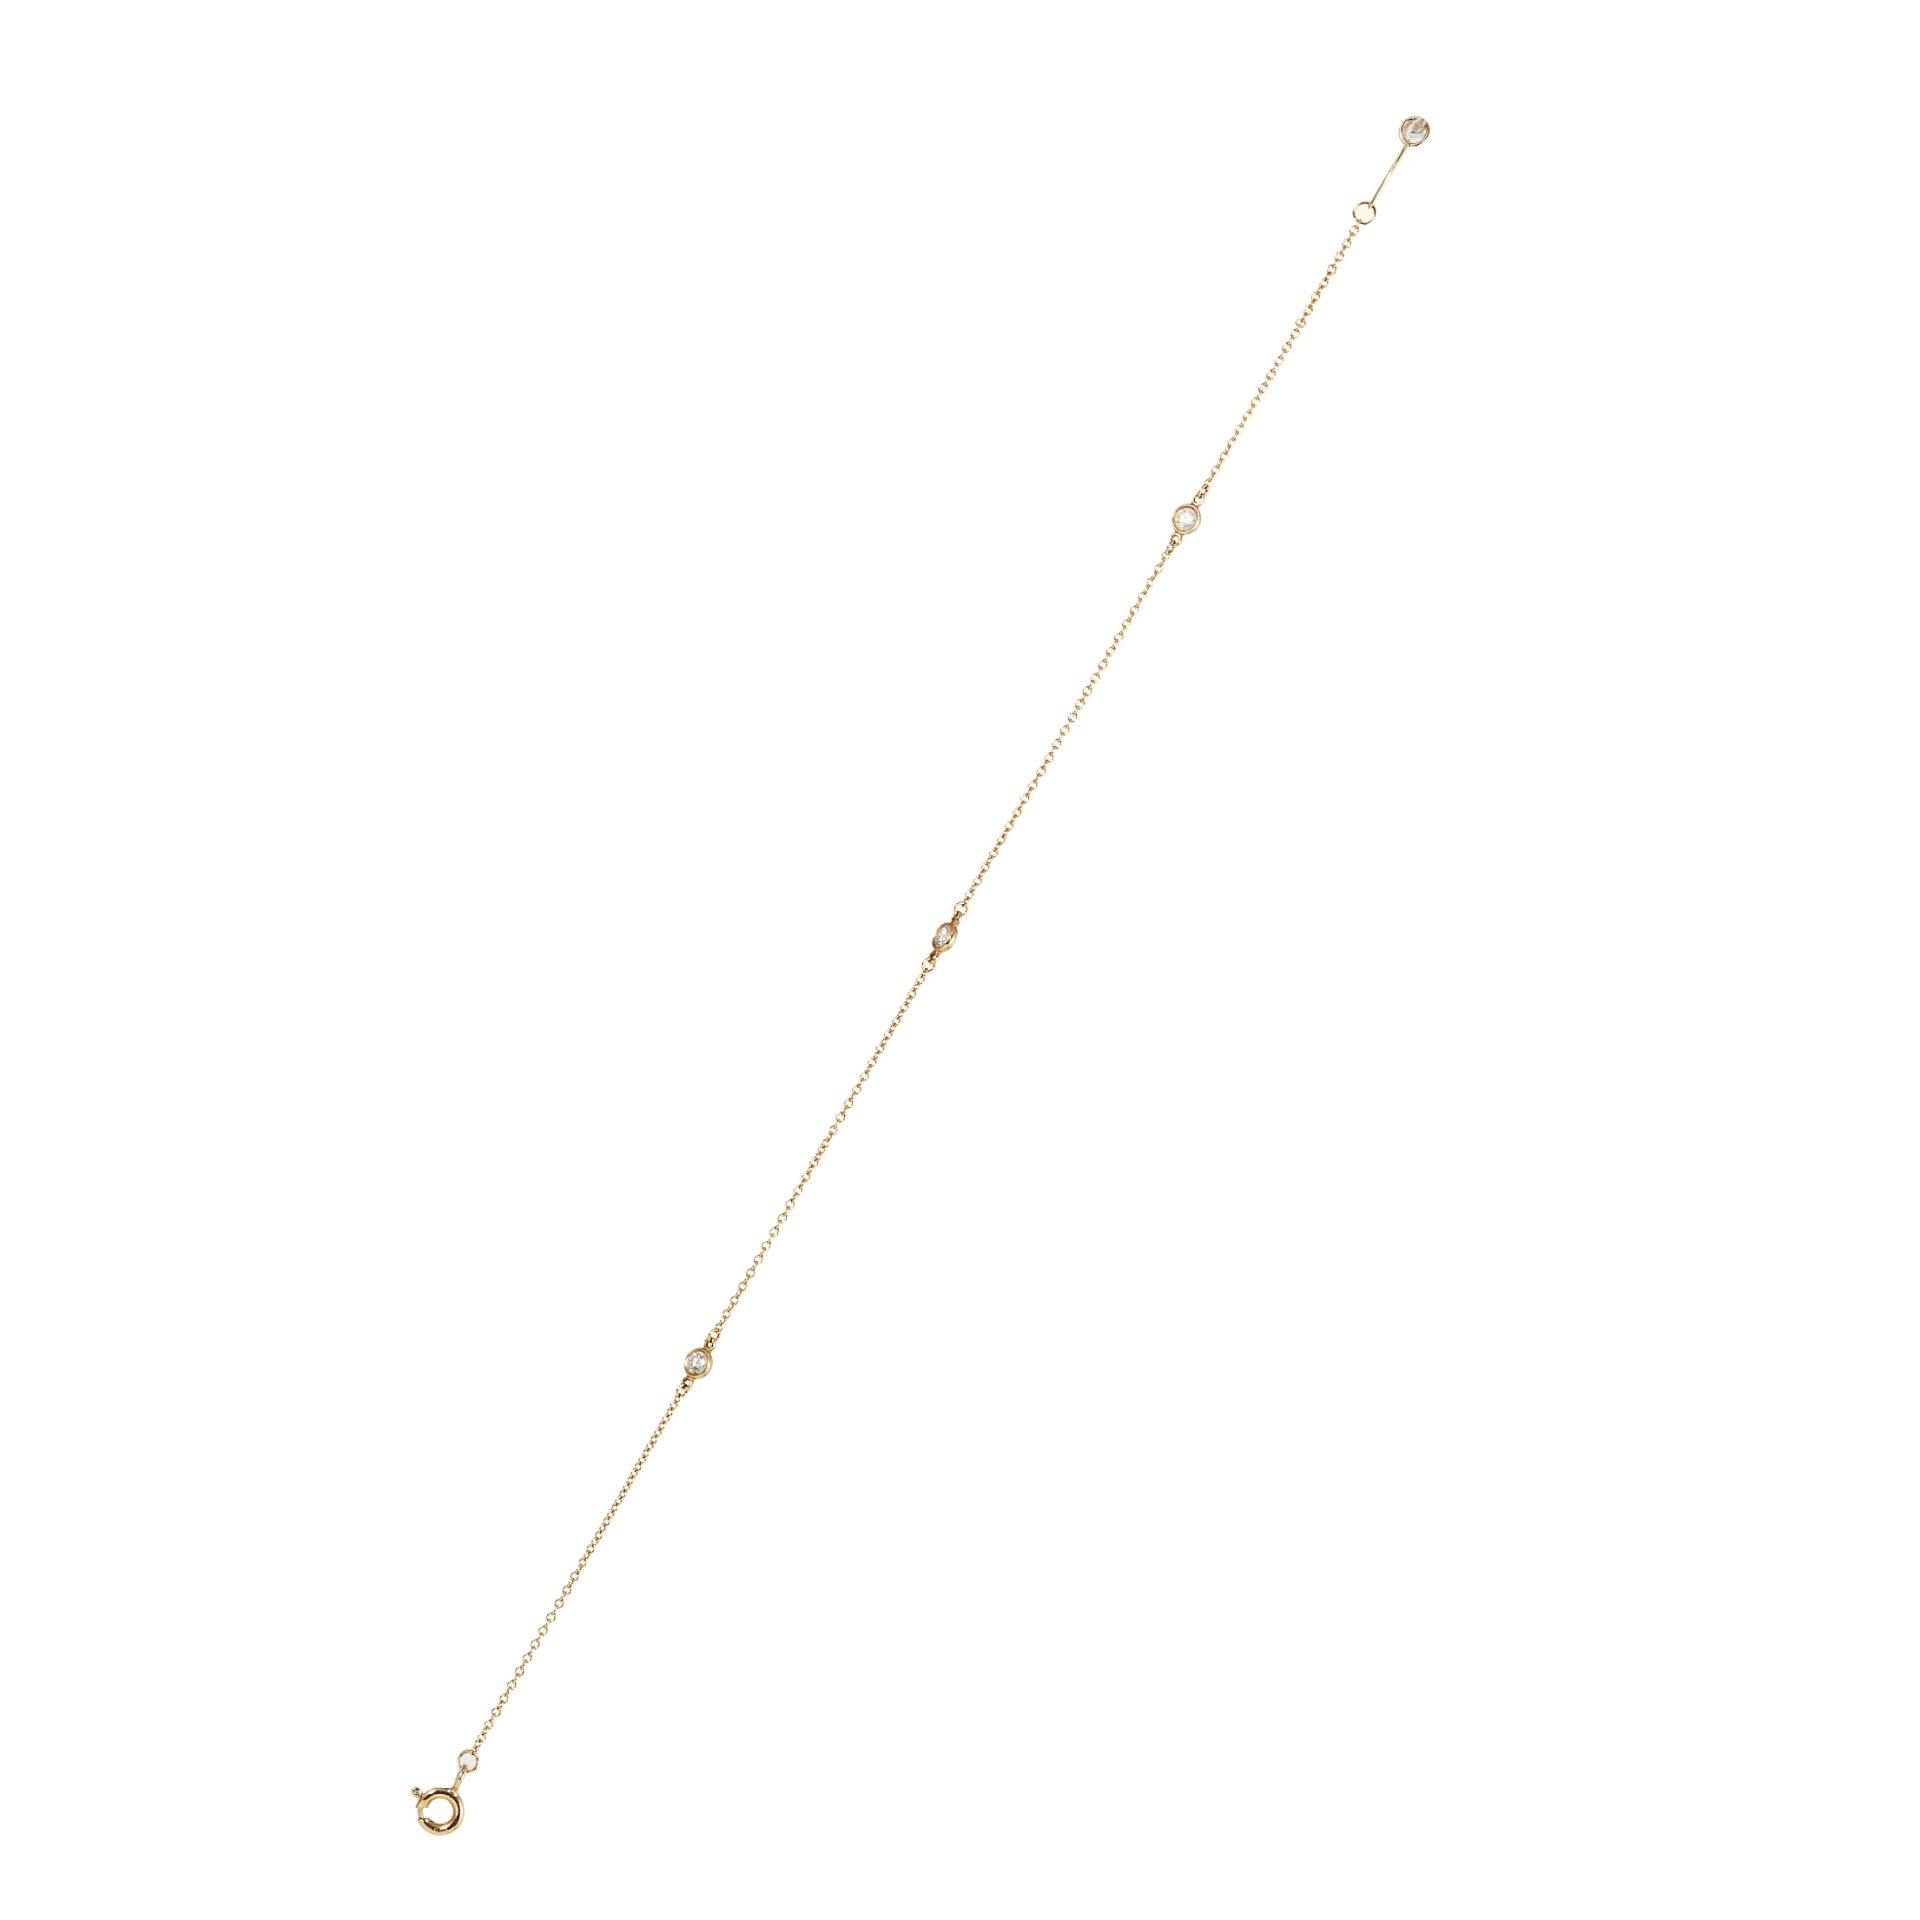 A DIAMOND BRACELET, TIFFANY & CO in 18 carat yellow gold, a fine gold chain holding three round